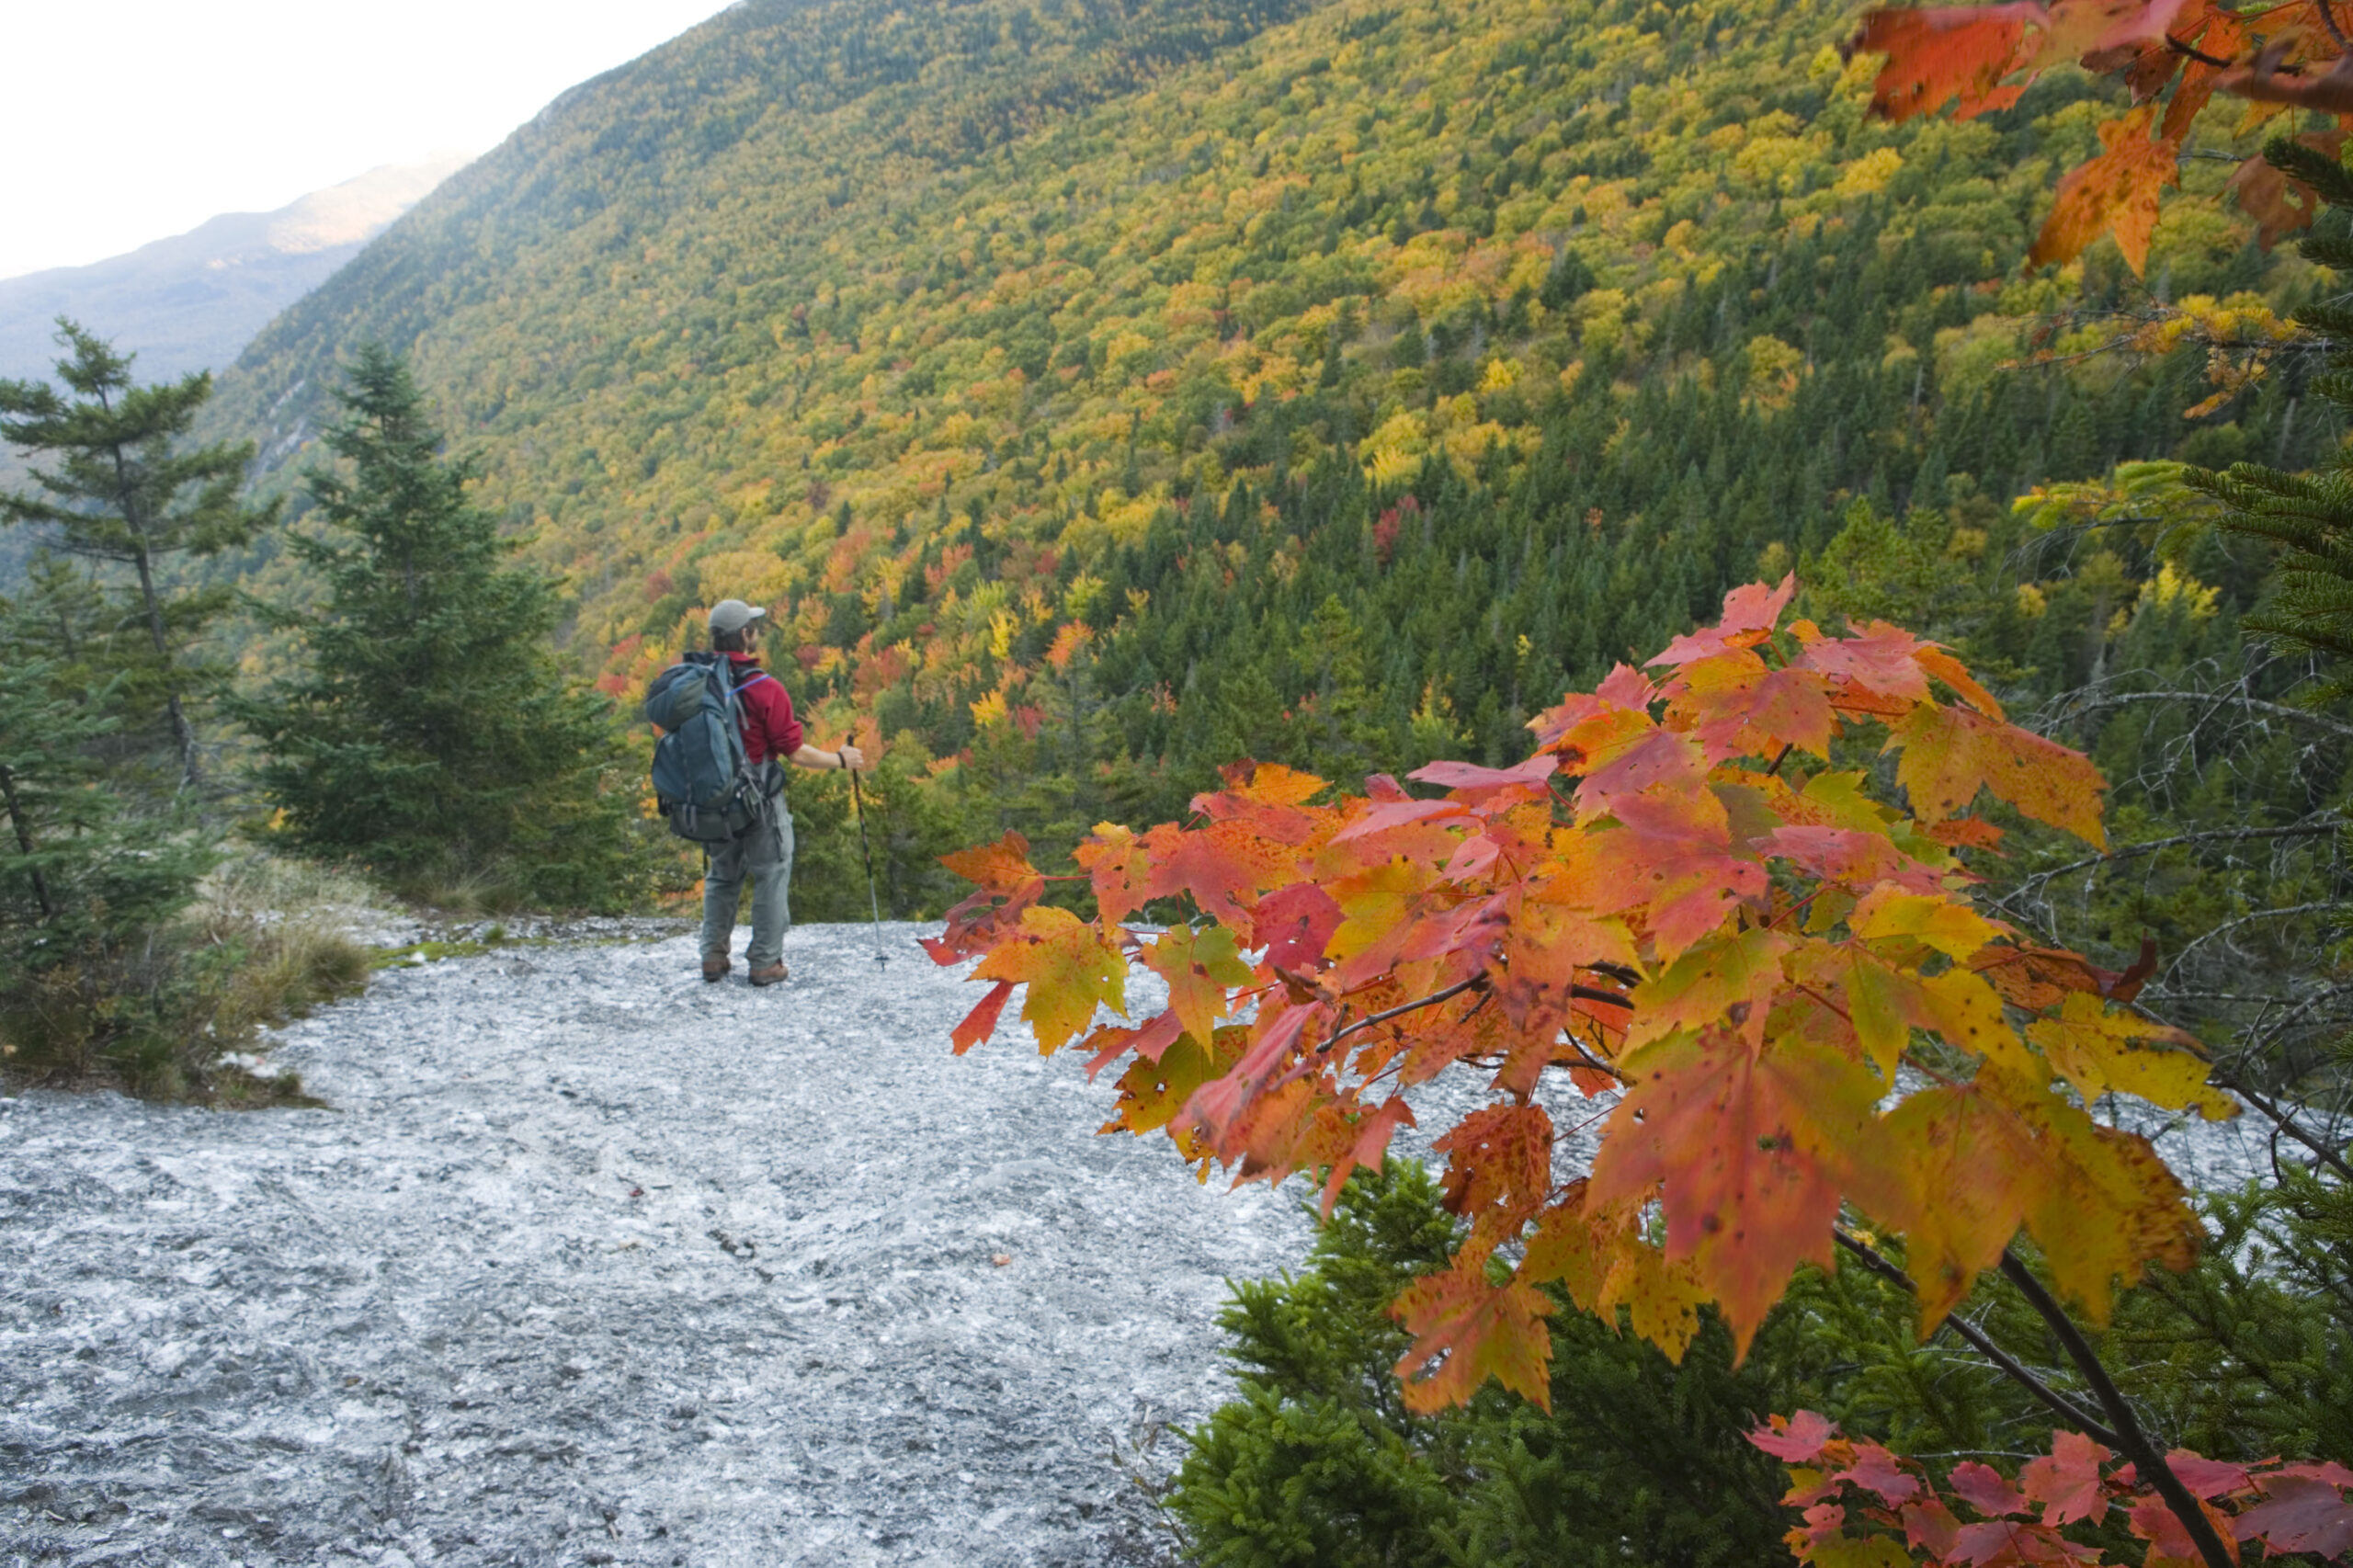 A hiker walking along a trail with autumn leaves in the background.